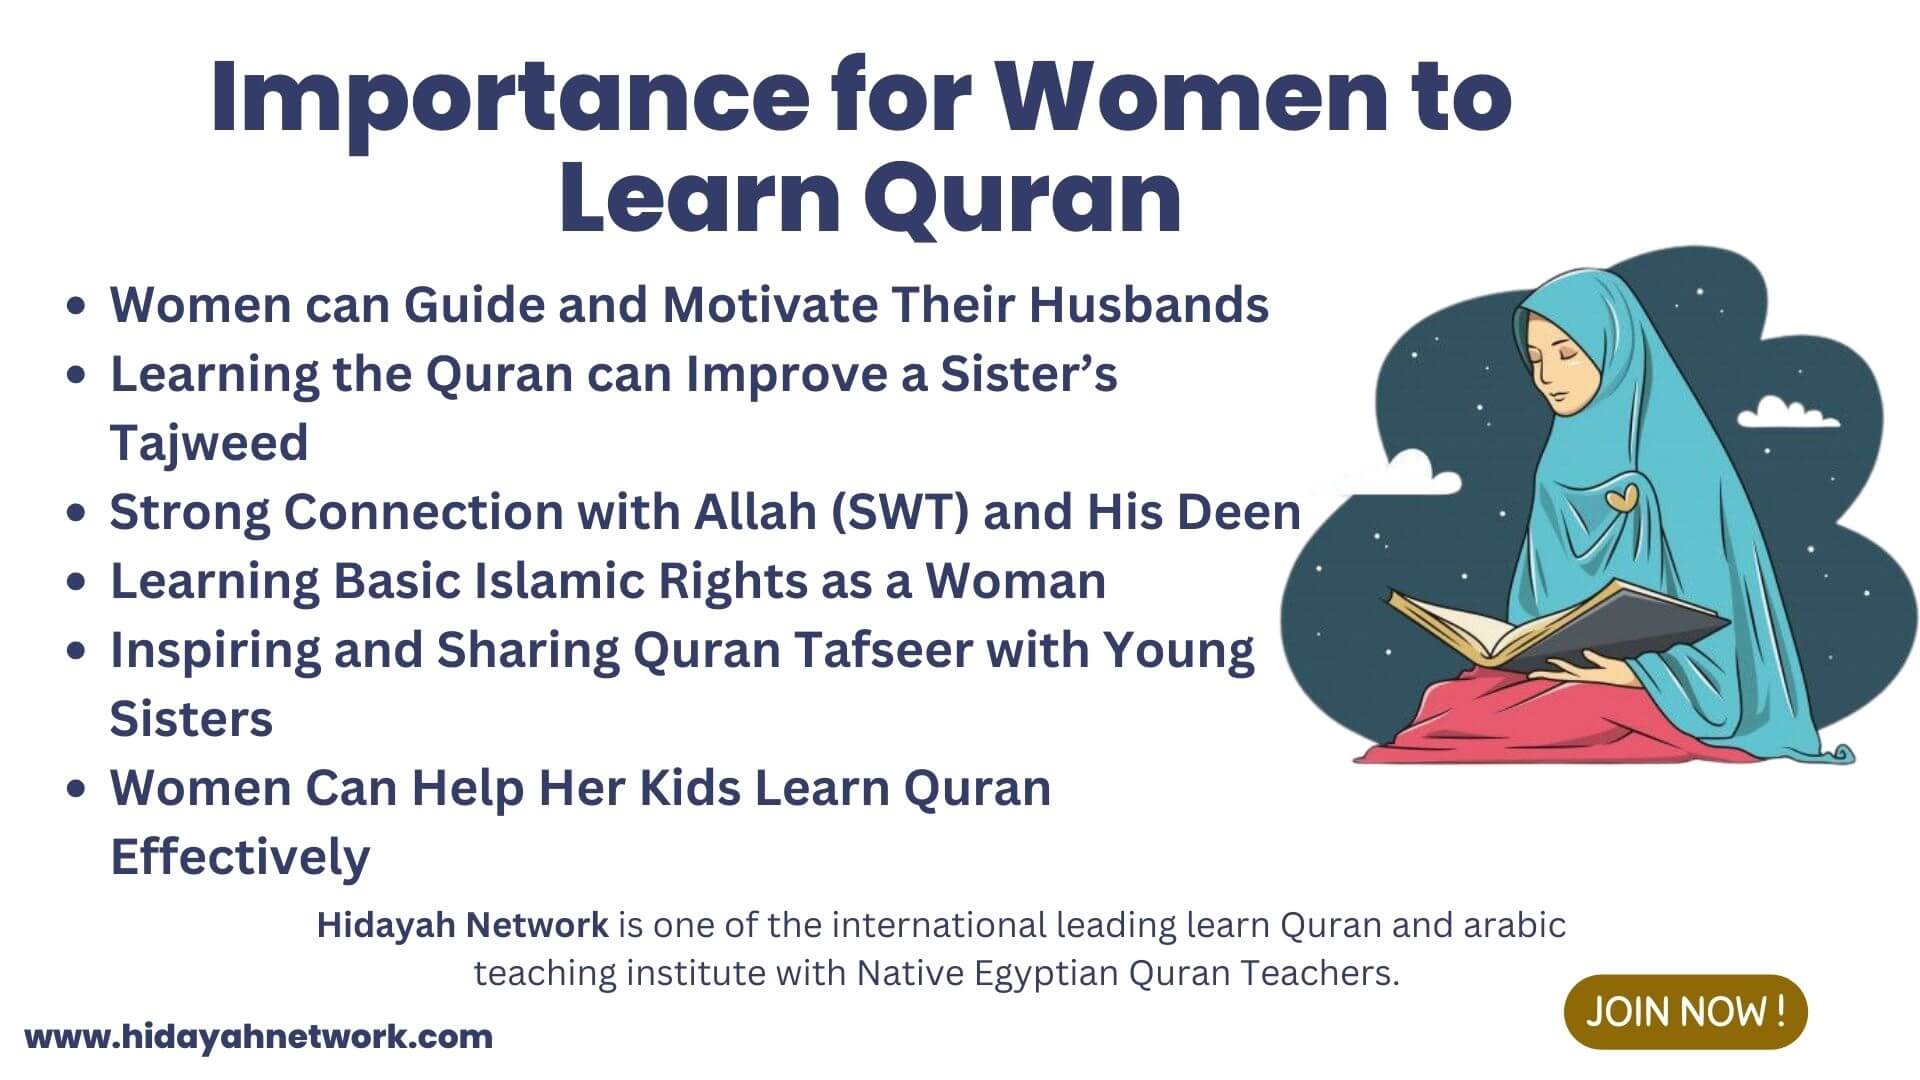 Importance for Women to Learn Quran